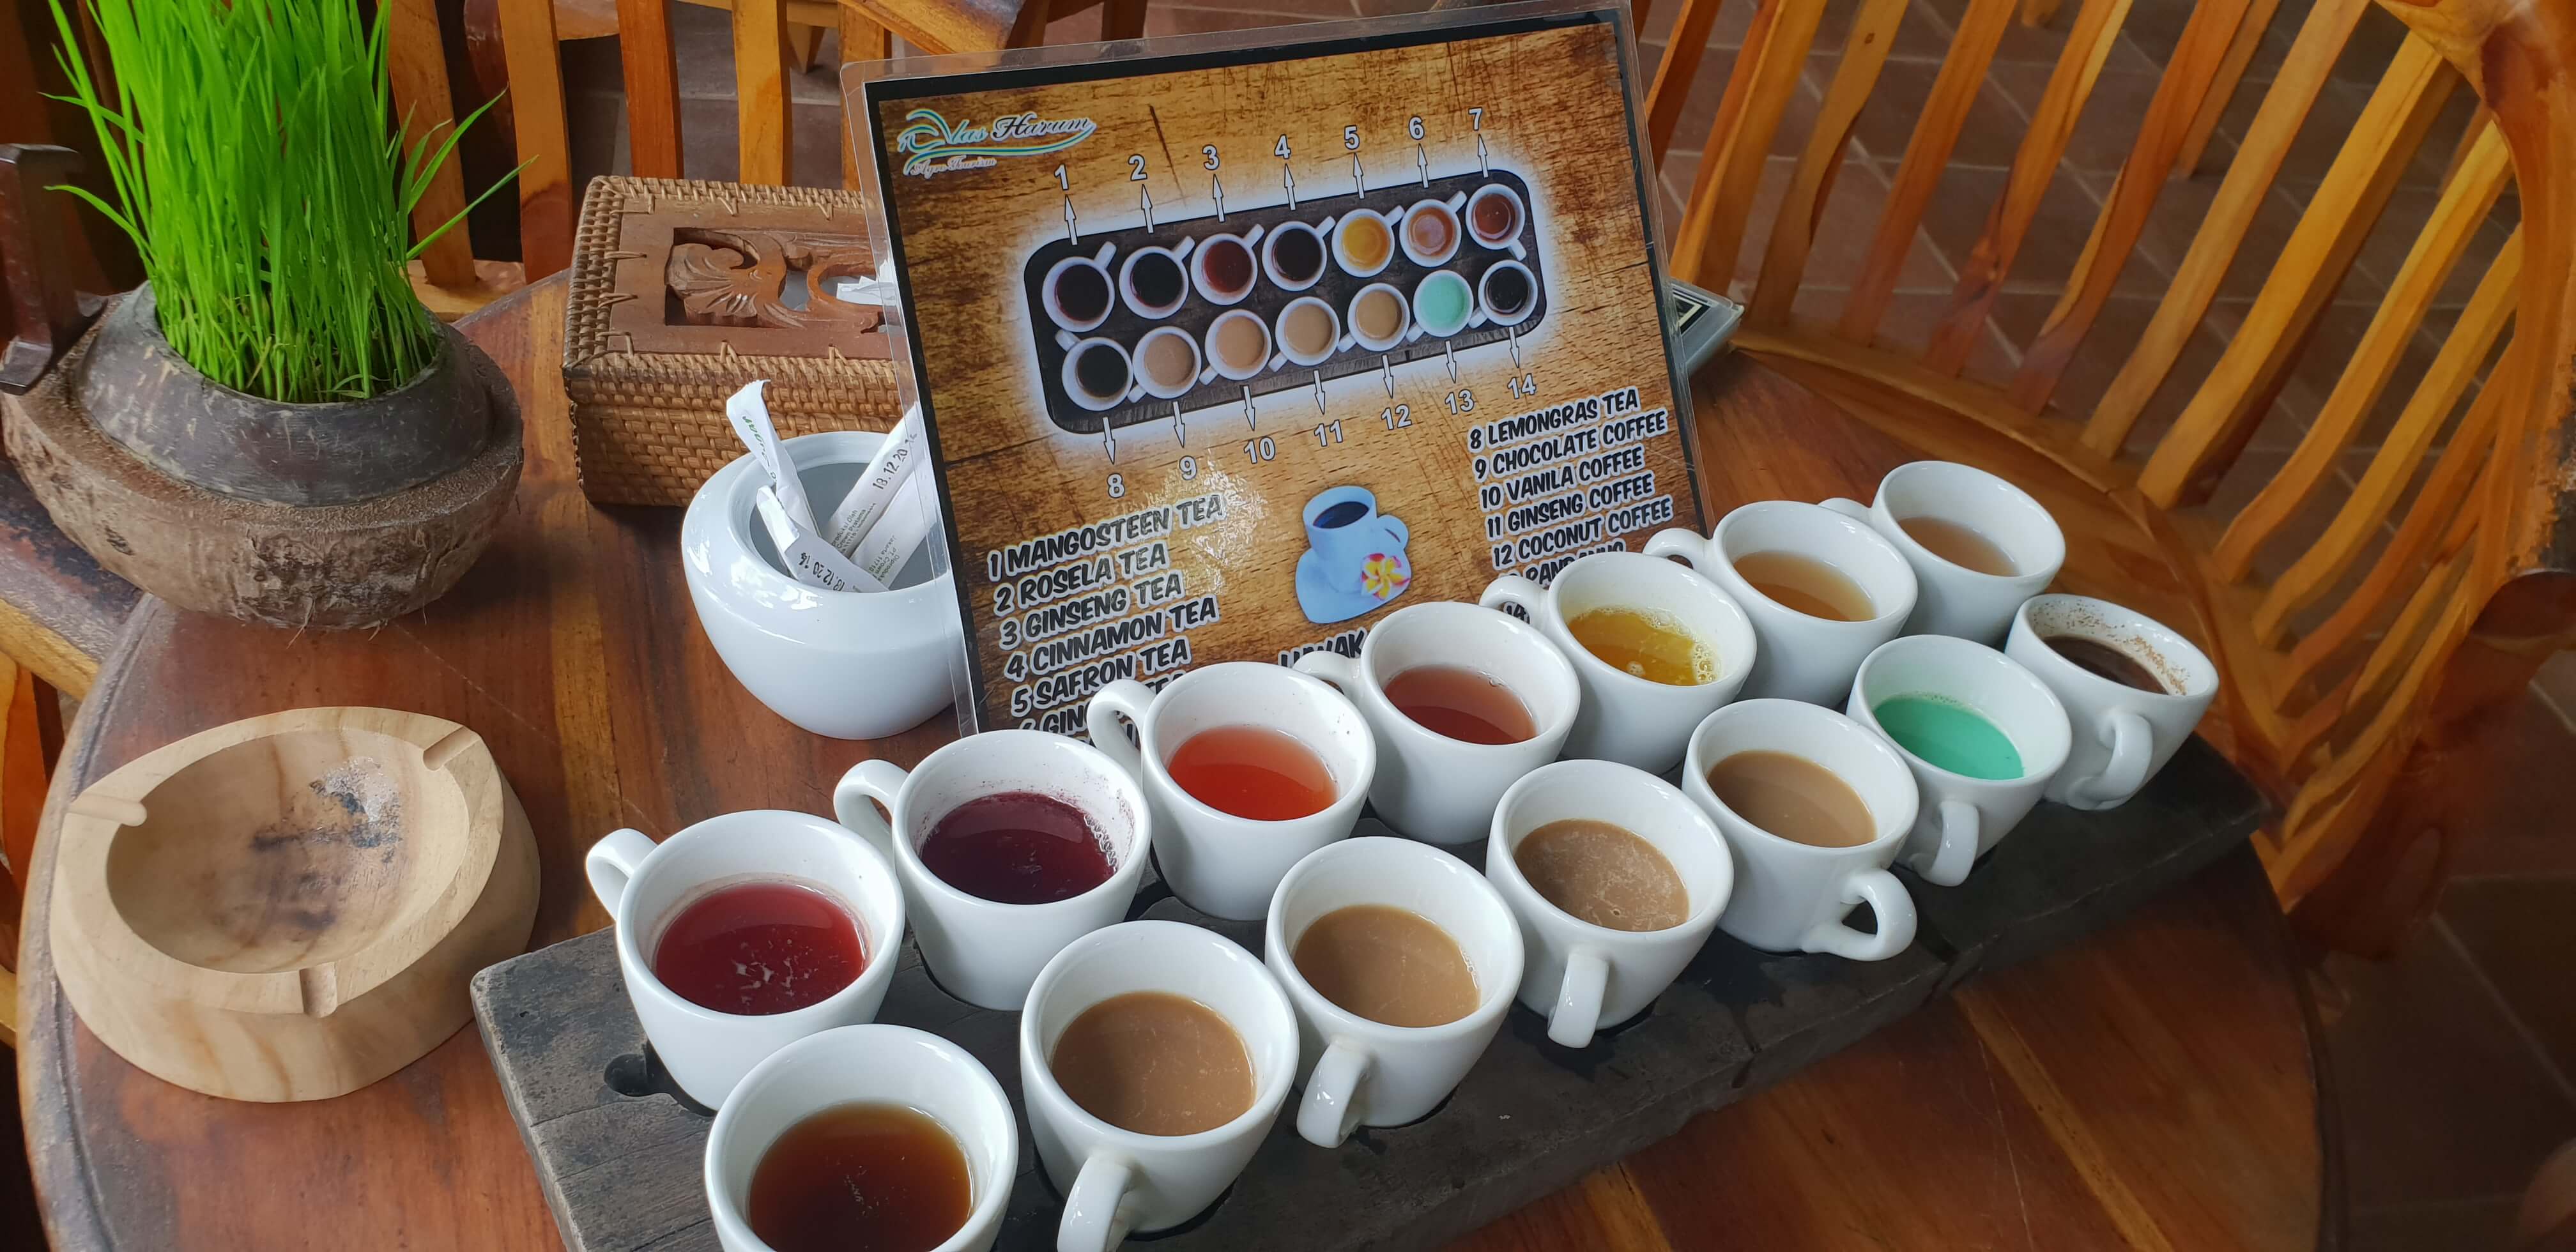 You get to enjoy a free comprehensive tasting with 15 different testers of teas and coffees